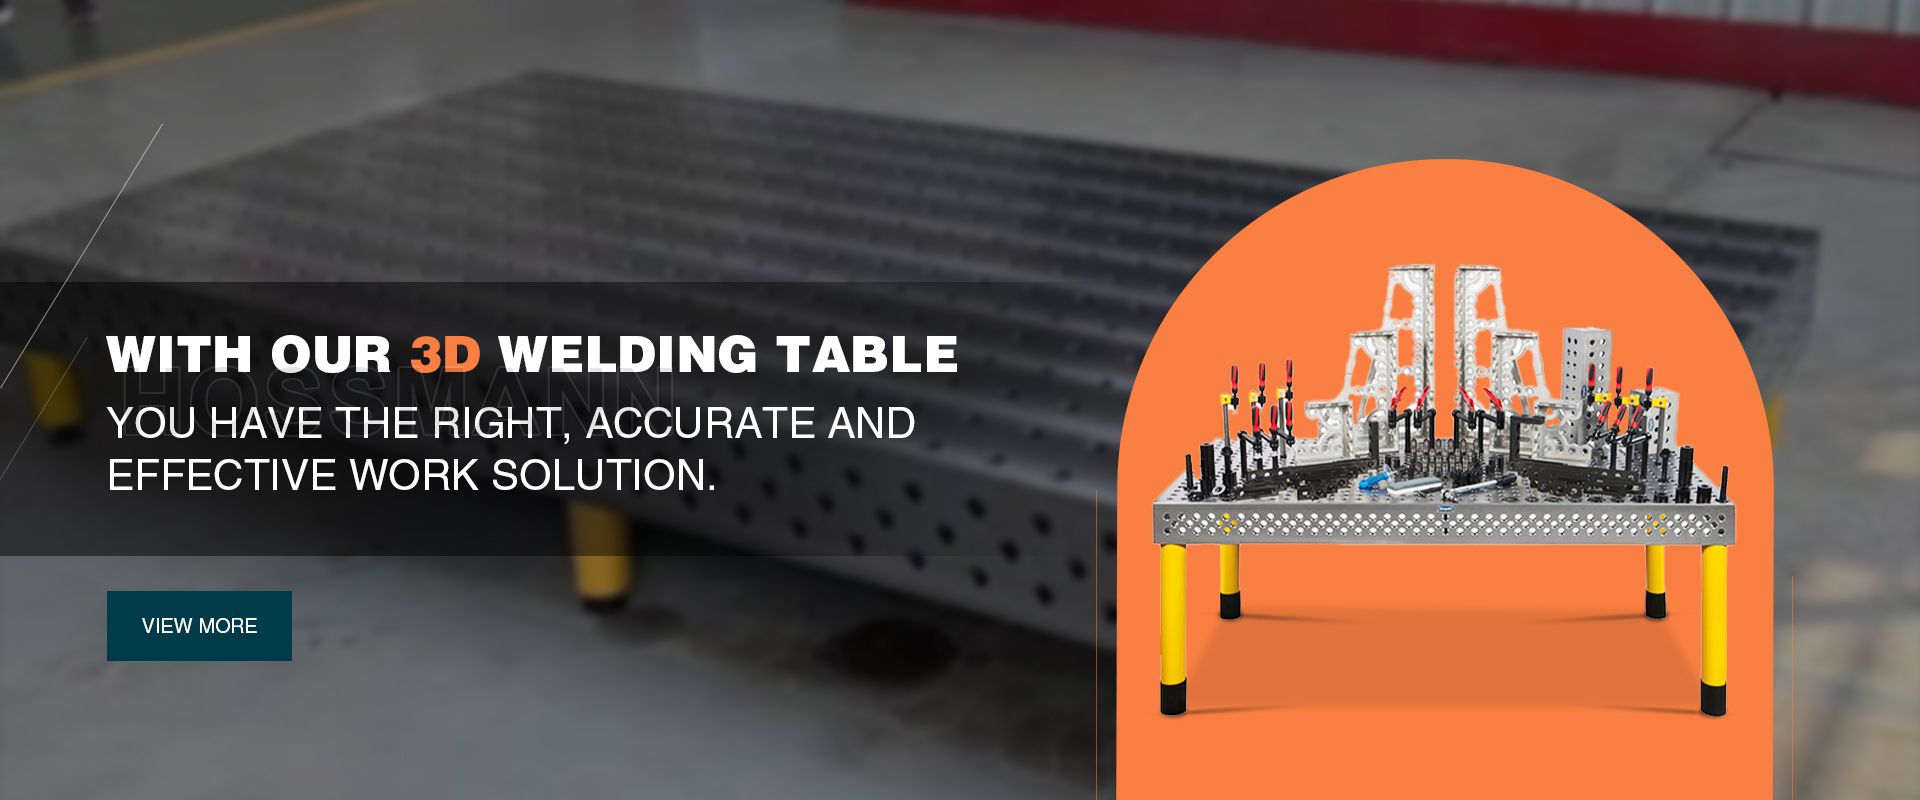 3D Welding Table With Casters